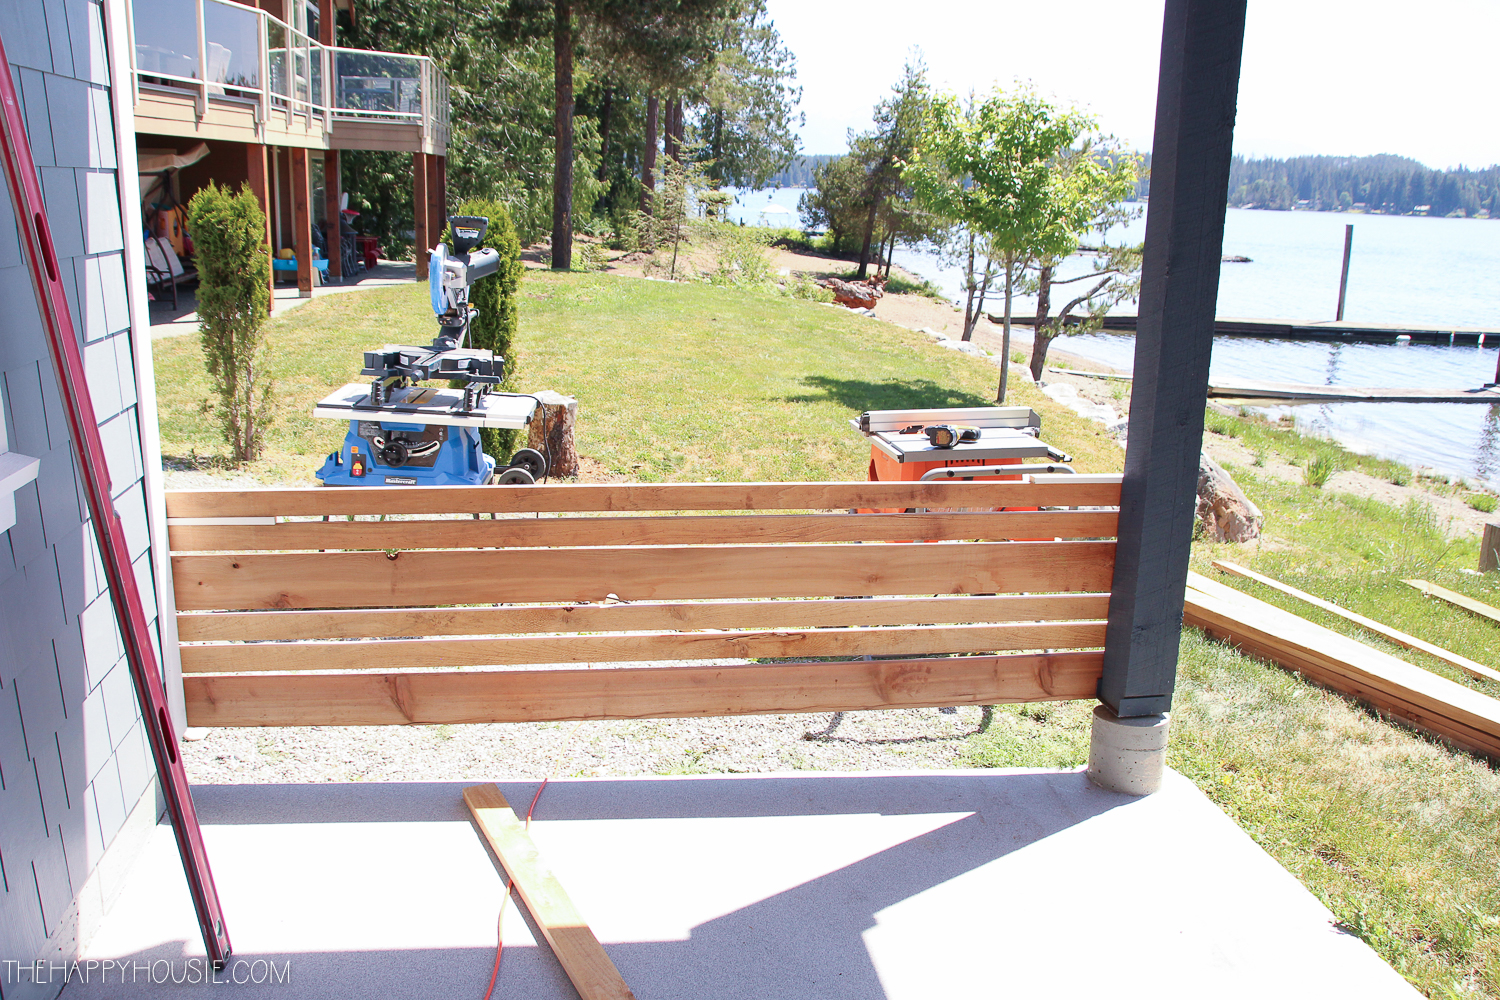 The wood being nailed into place on the porch beside the saw.